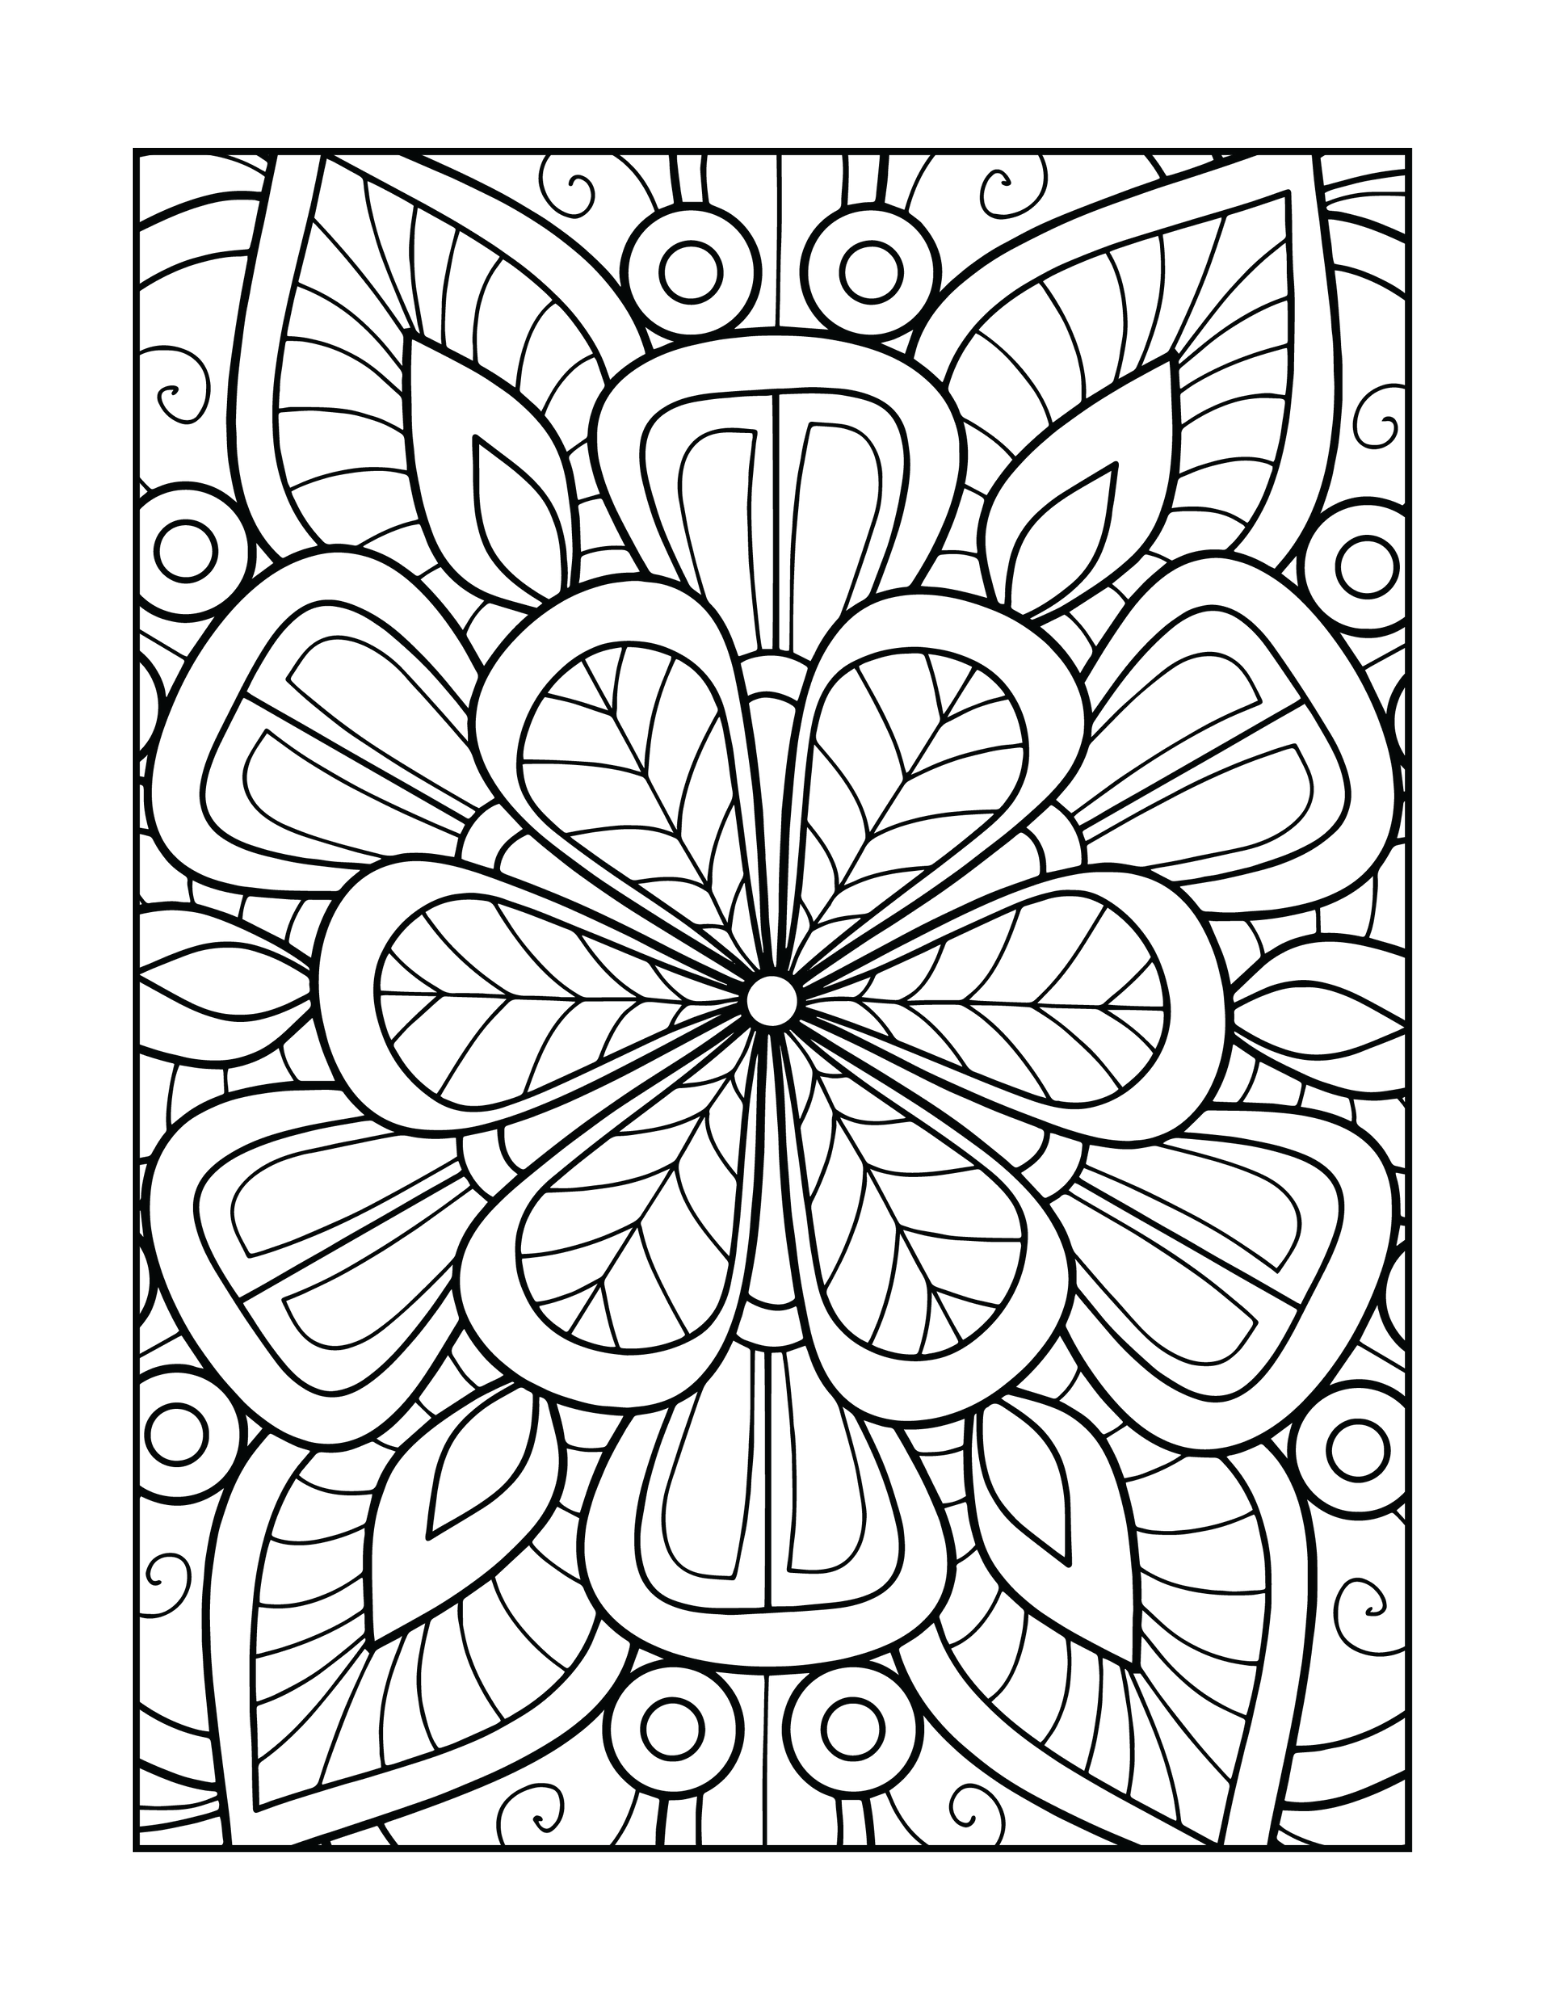 26 PC Mandala Coloring Book Markers Set Stress Relieving Animal Design —  AllTopBargains